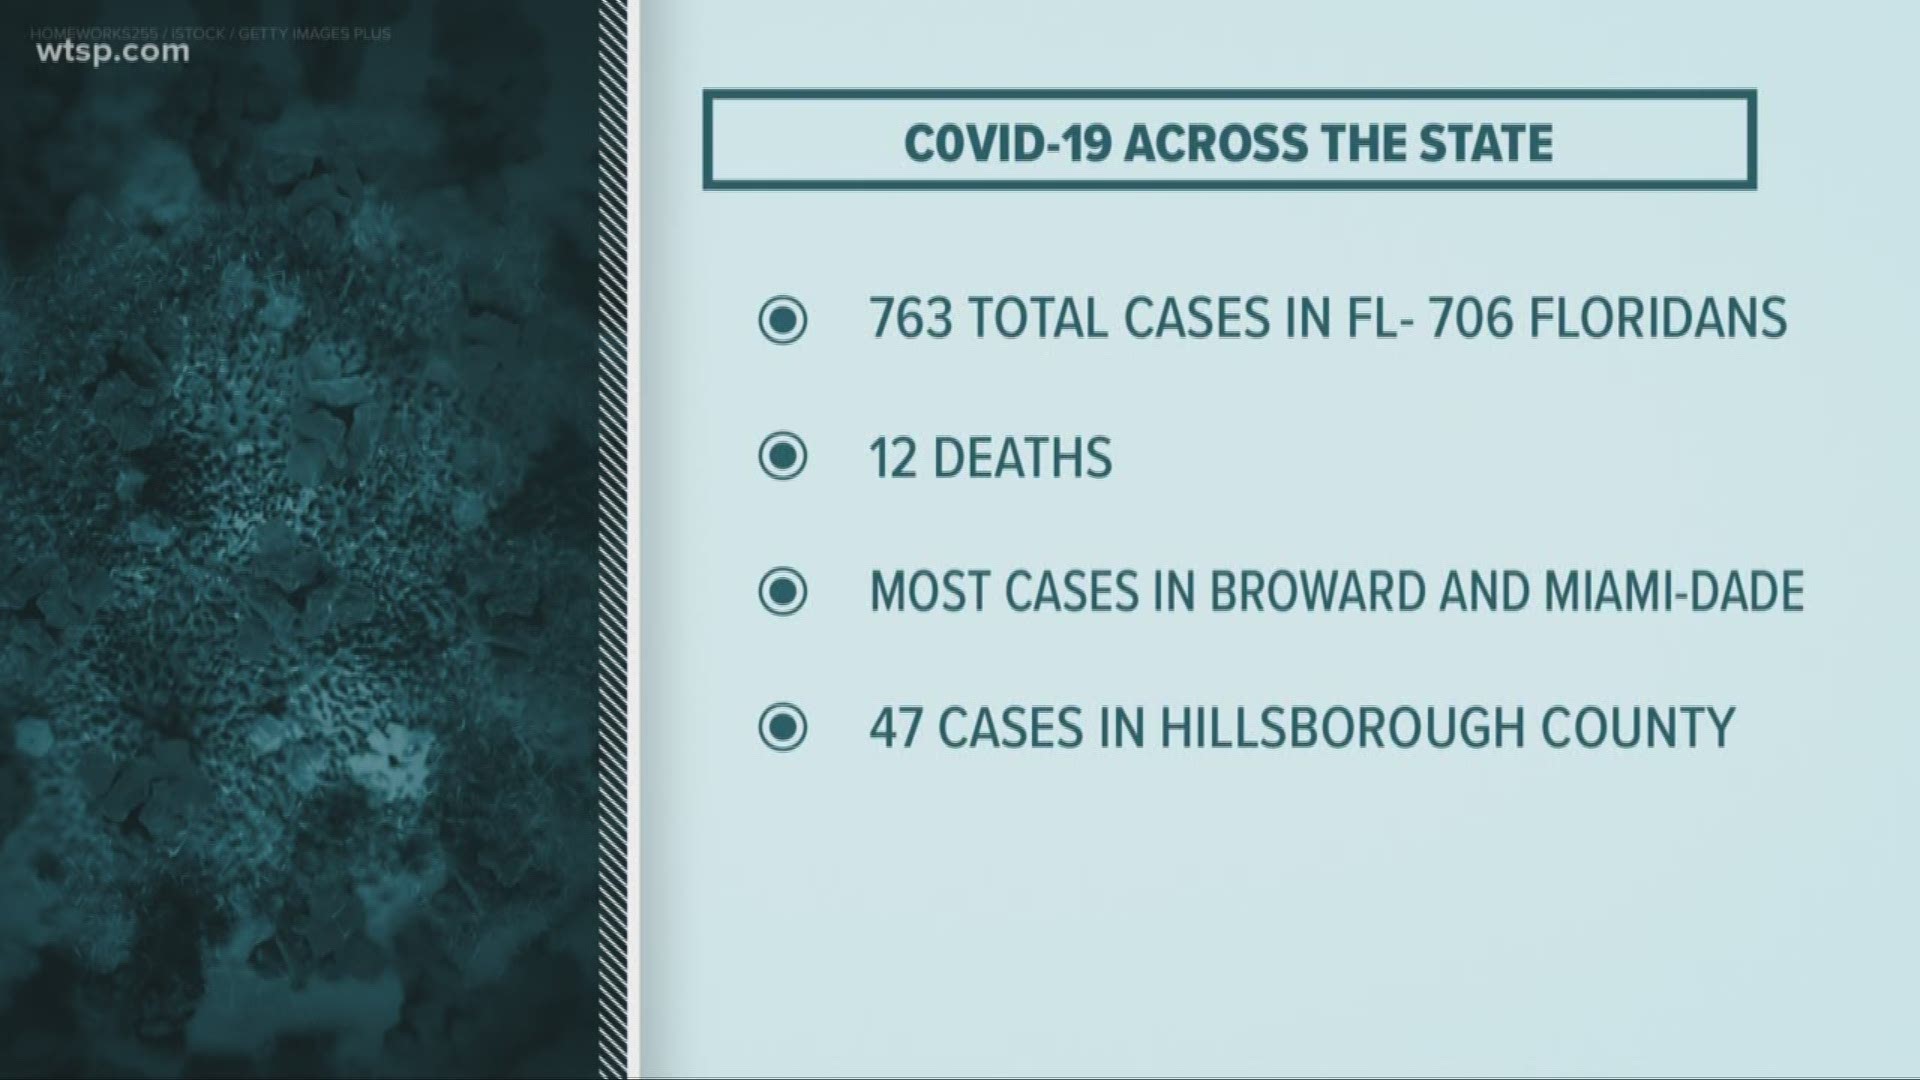 The Florida Department of Health announced more than 100 new cases of coronavirus in the state Saturday evening.